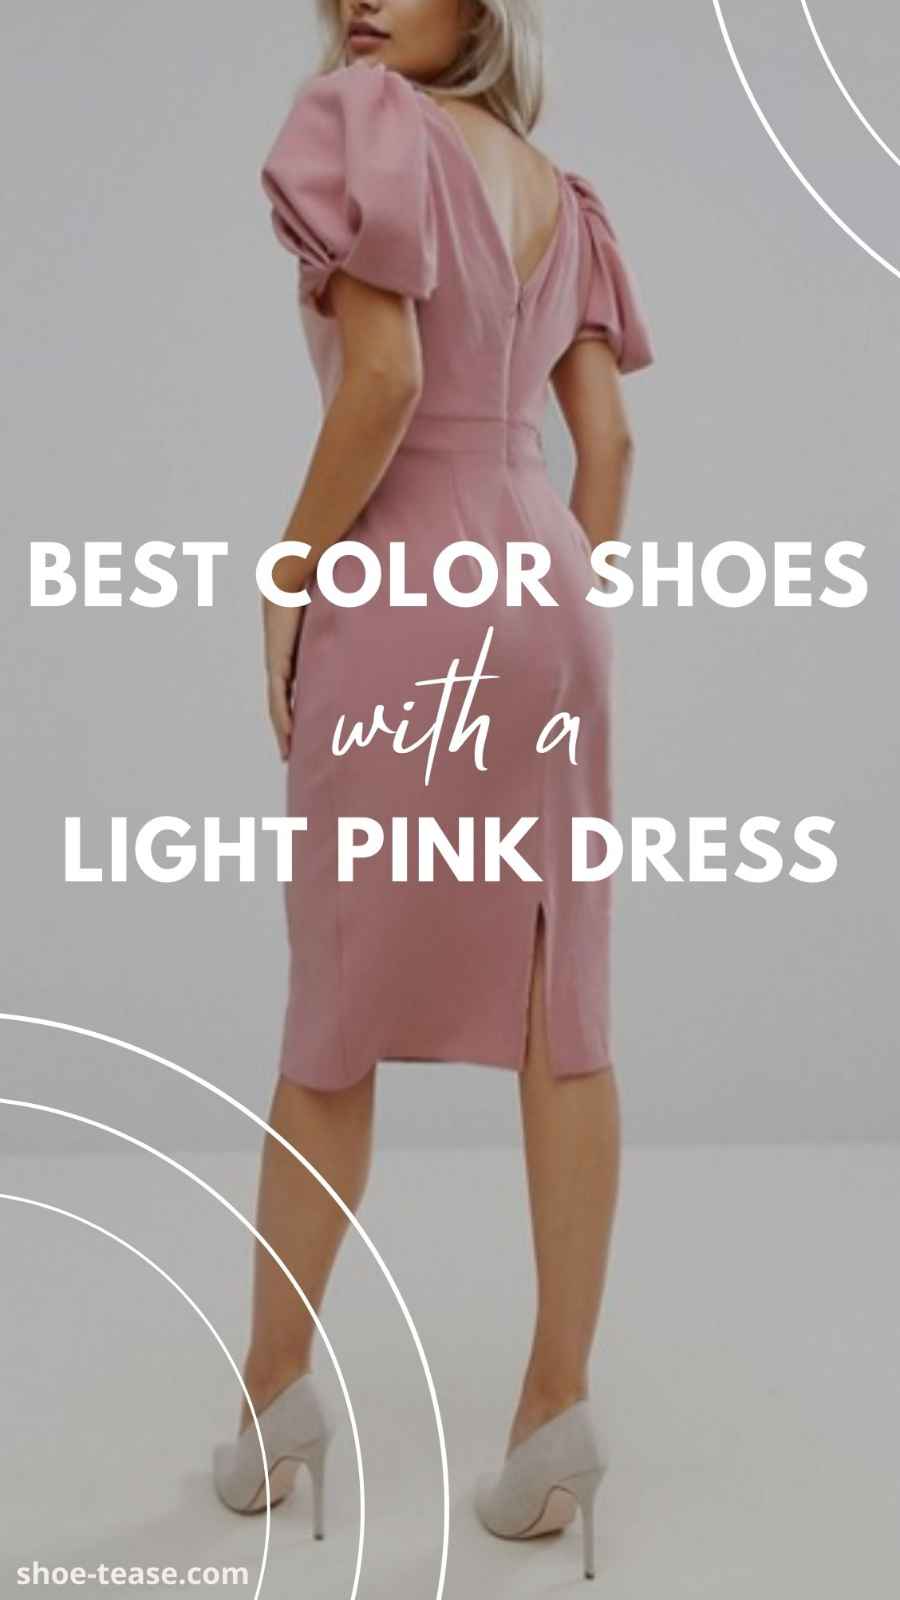 Match shoes dress color pink what hot 